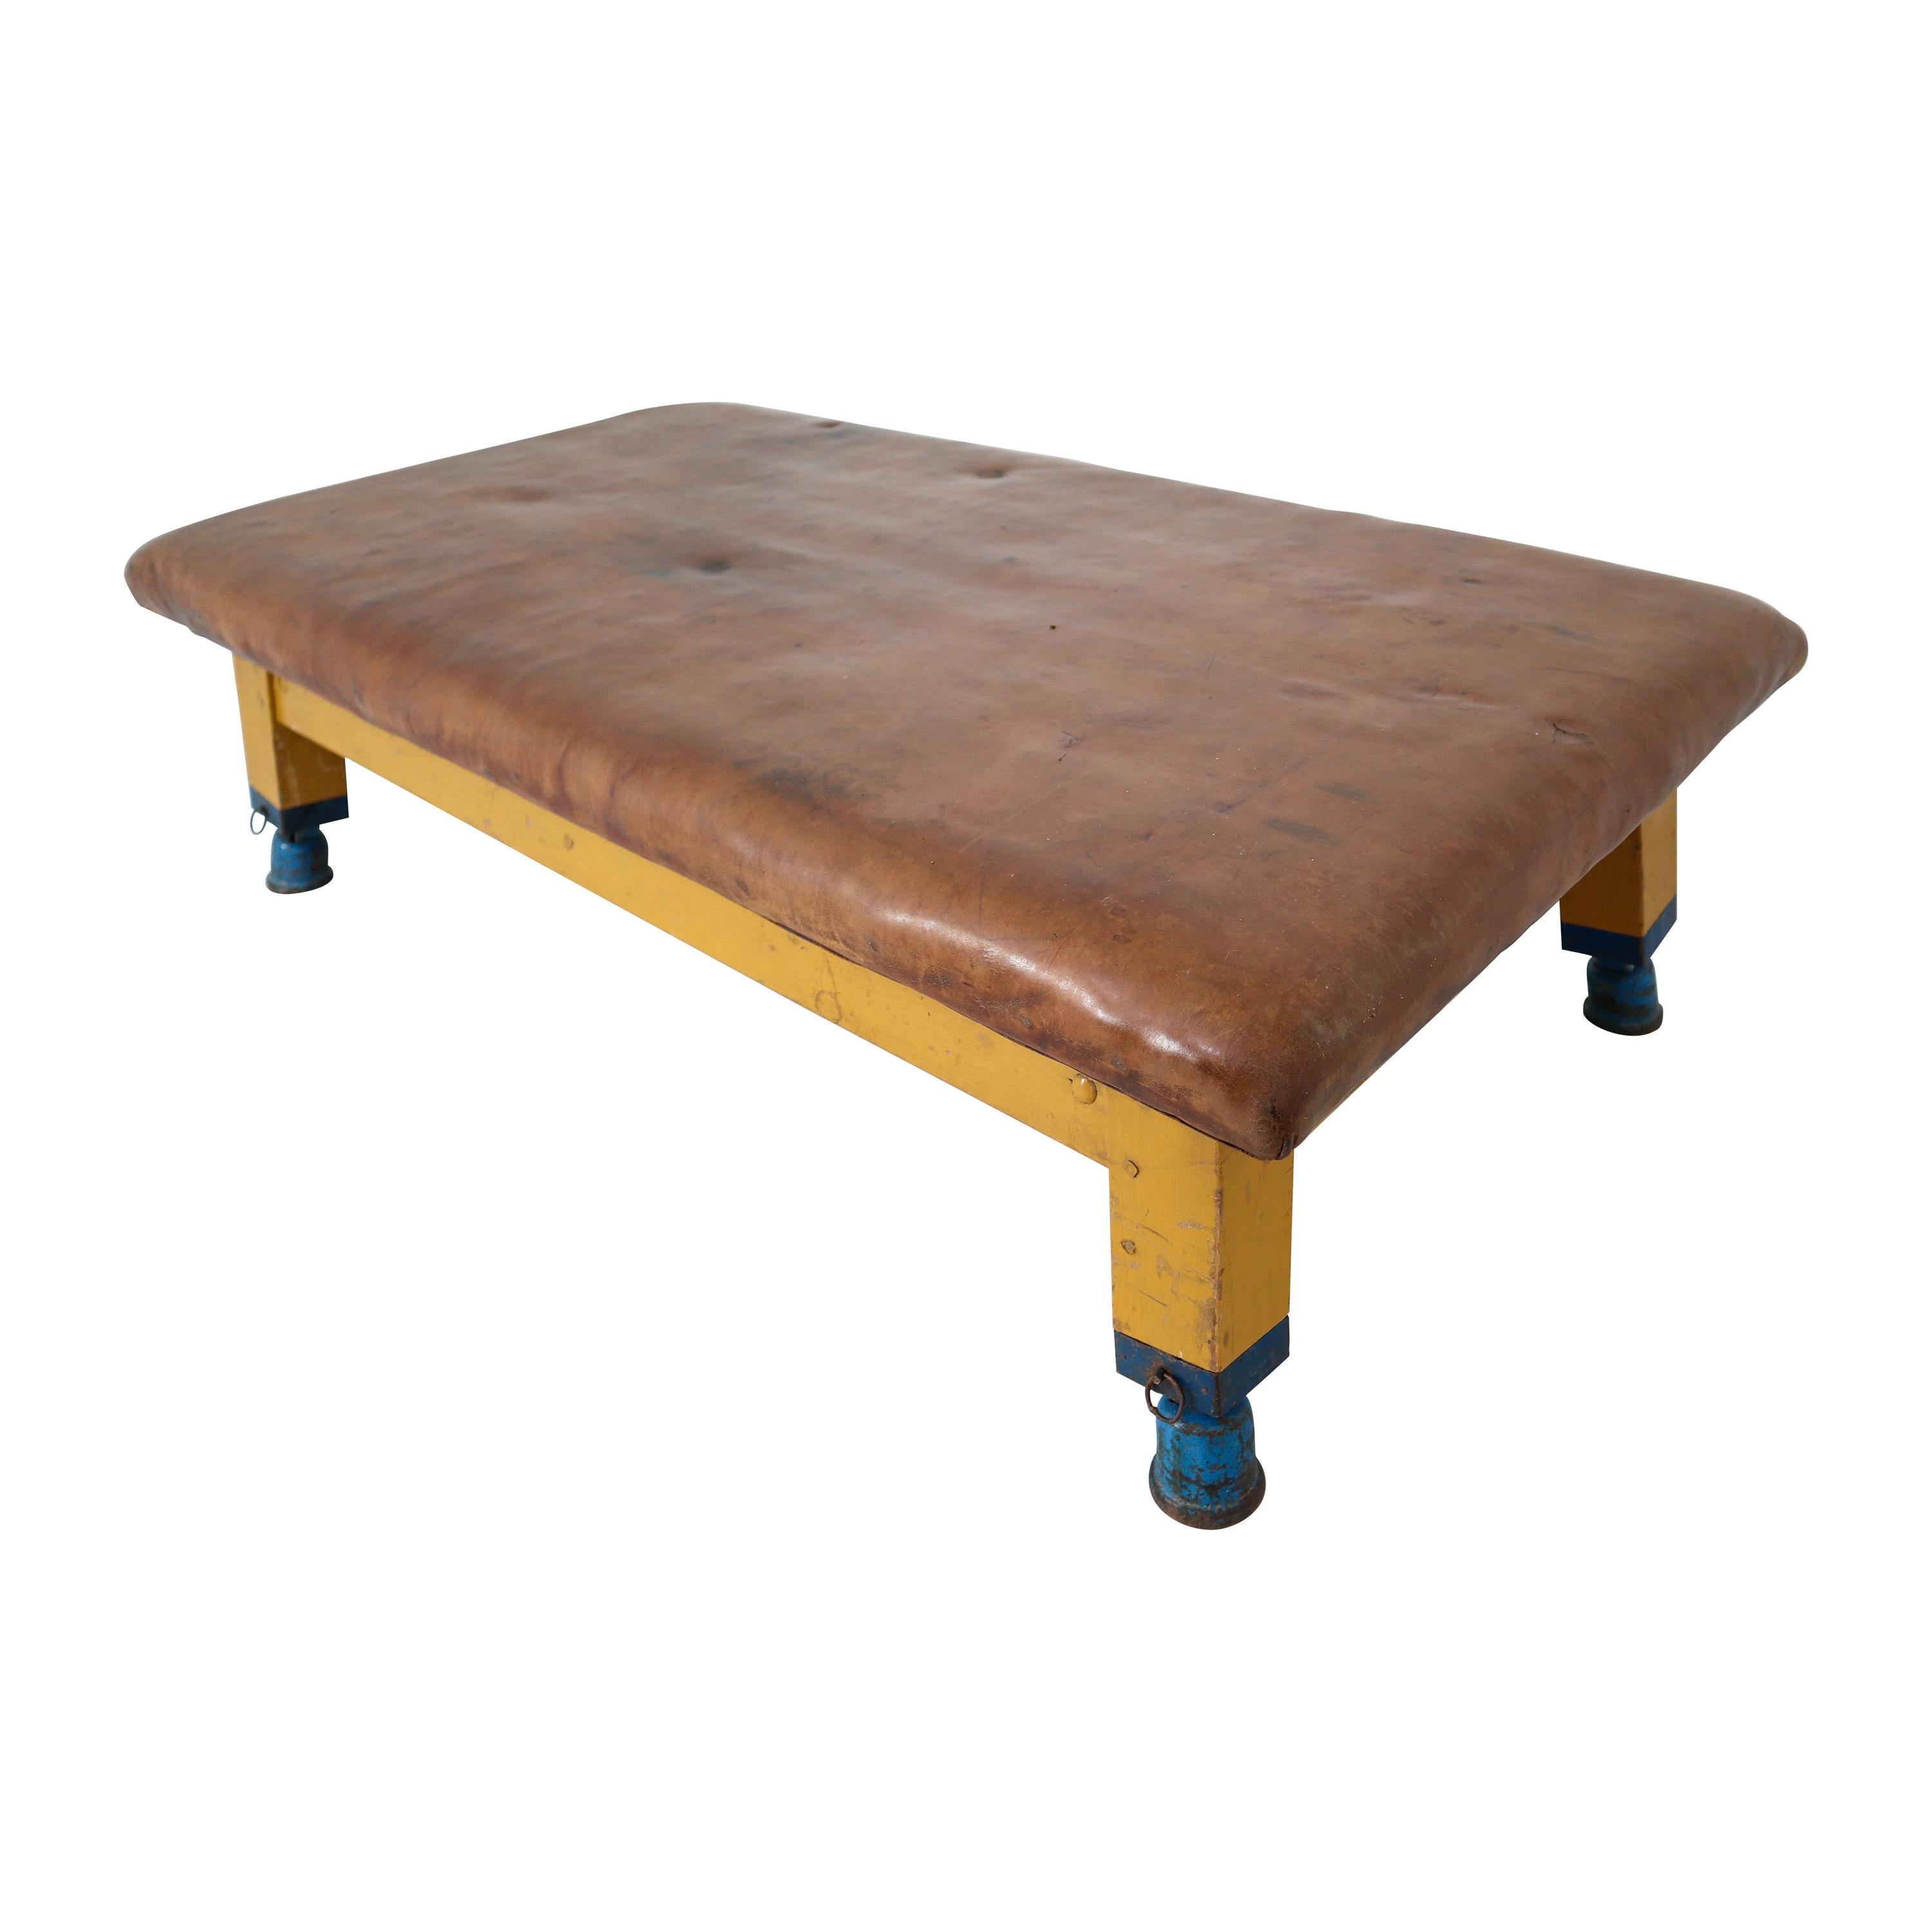 Vintage Strong Patinated Leather Gym Bench or Table, circa 1940